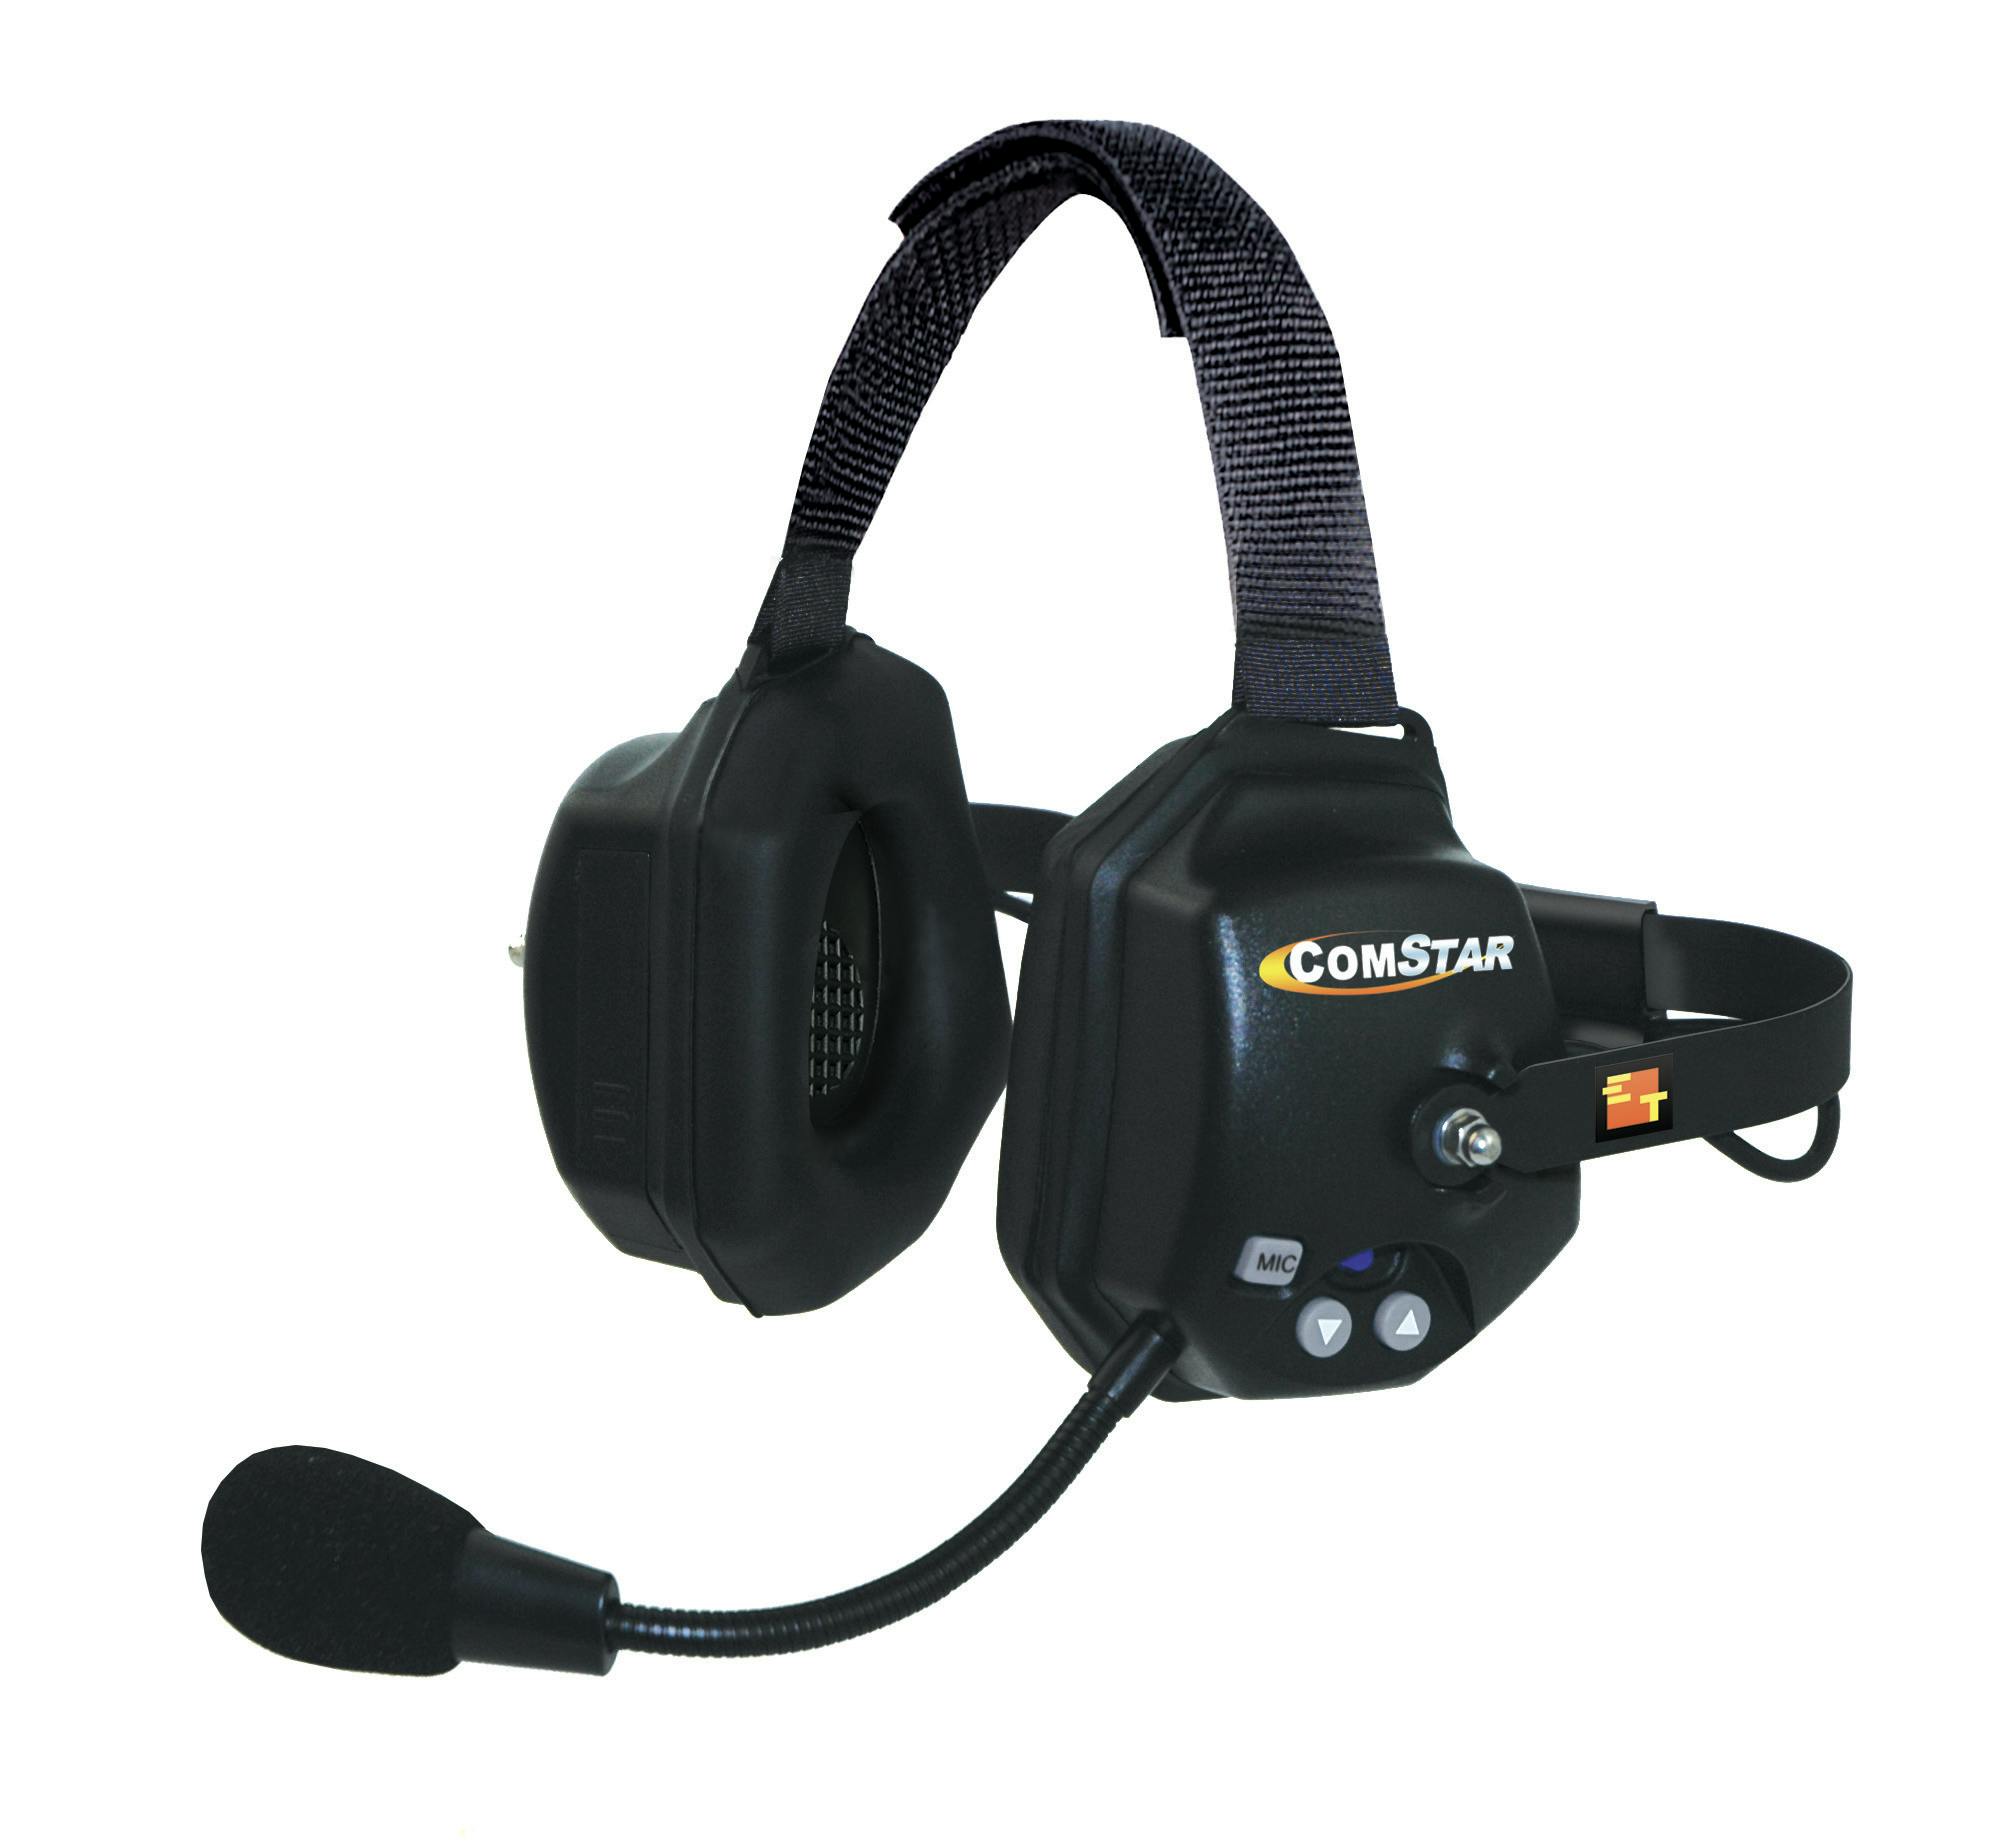 Eartec Updates ComStar Wireless Communication System | Industry News